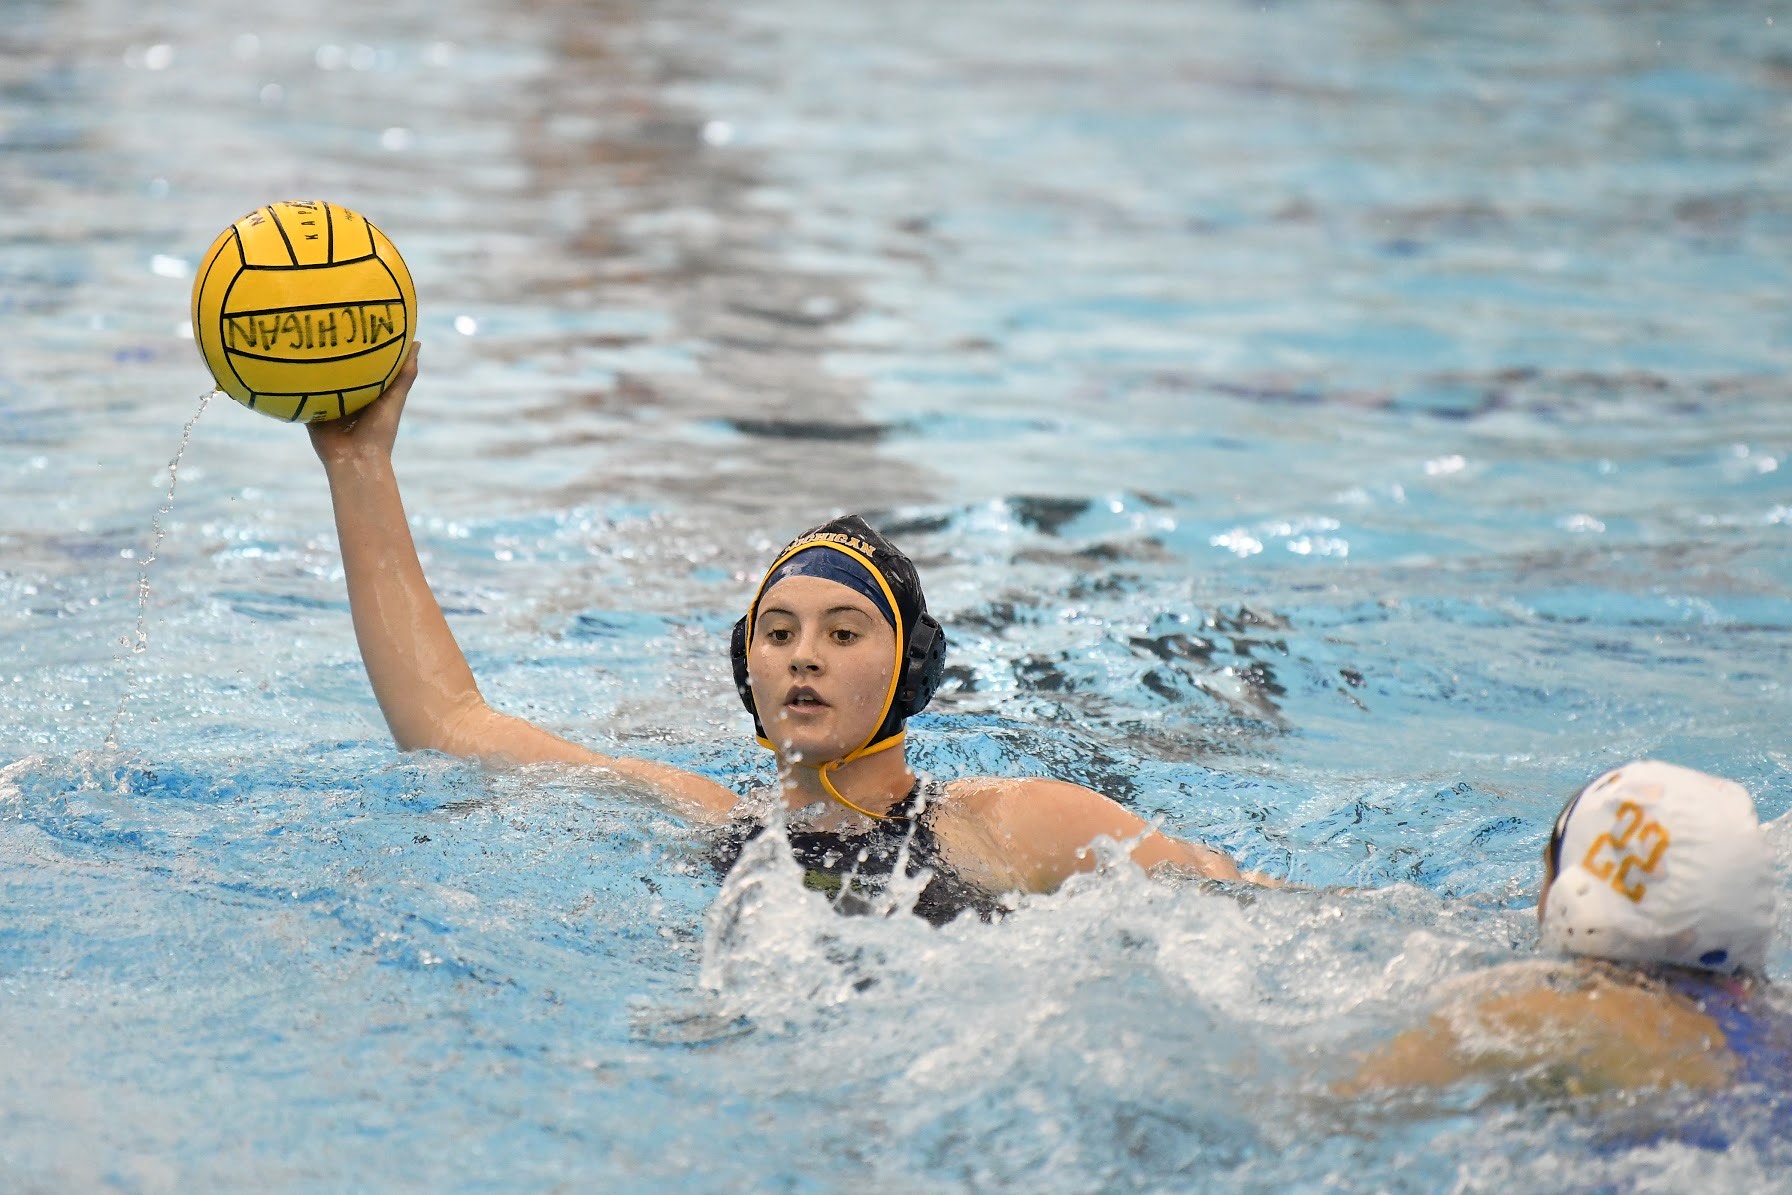 Kathy playing water polo